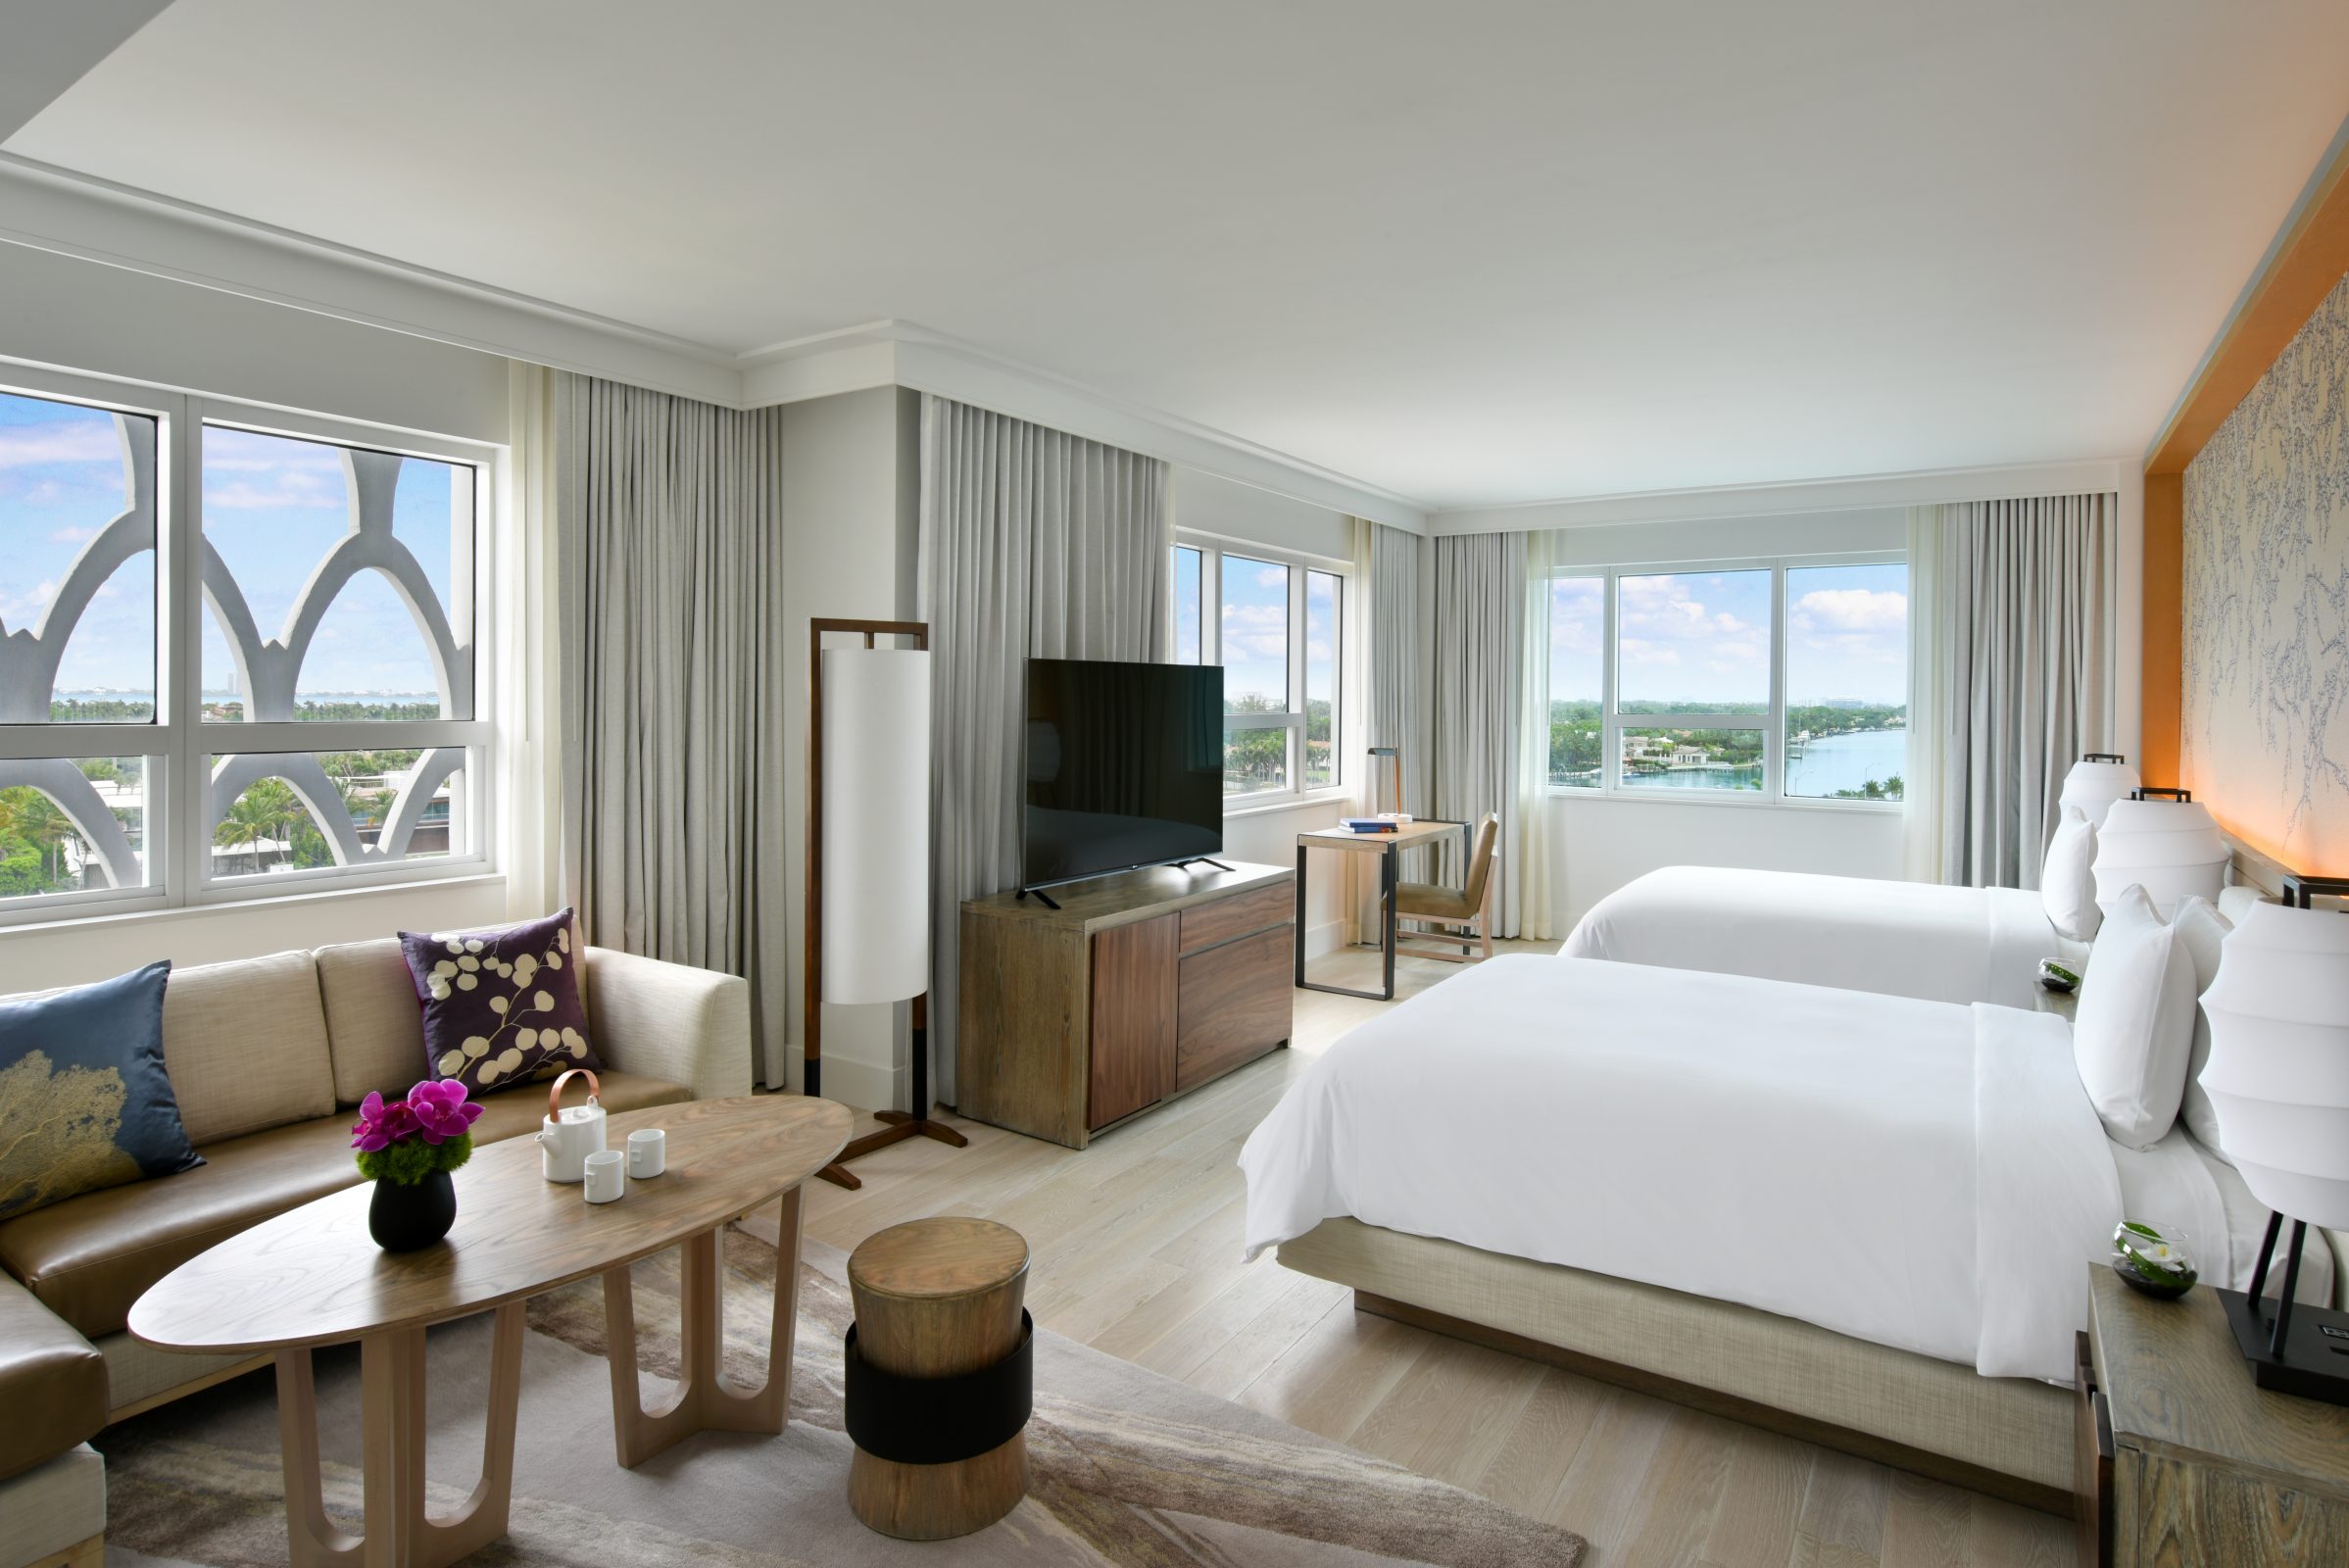 The comfortable Intracoastal suite at the Nobu Eden Rock hotel designed by Rockwell group